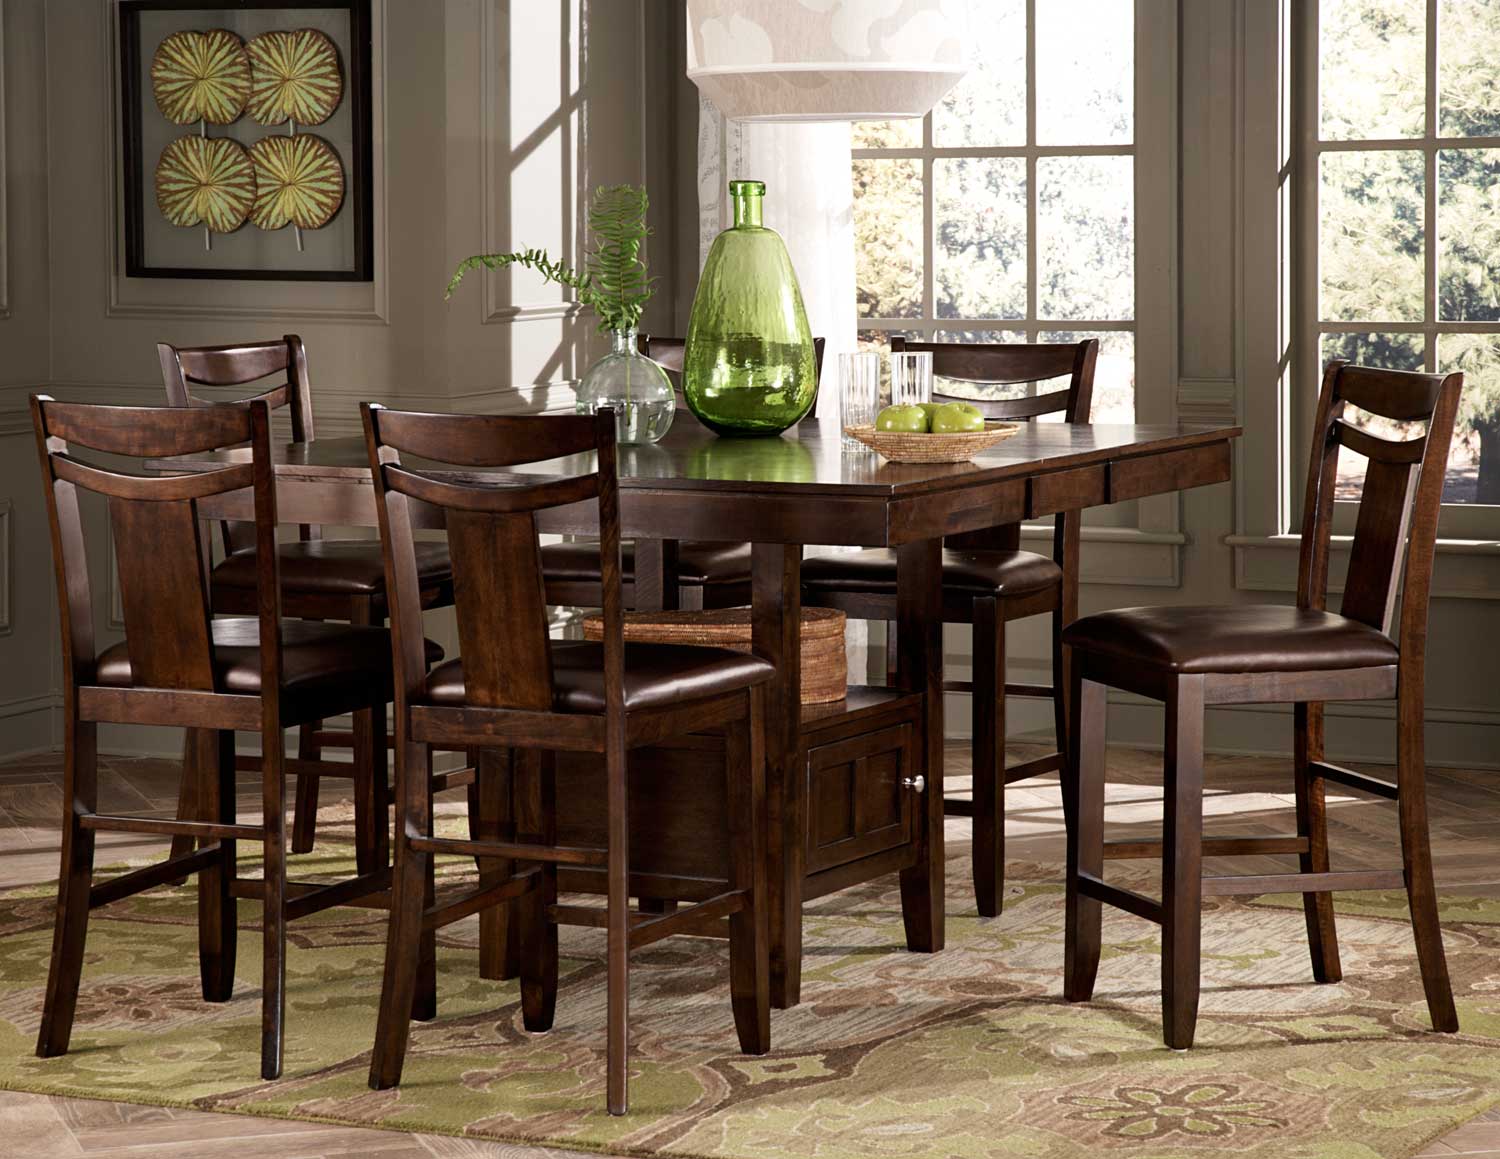 Homelegance Broome Counter Height Dining Set - Dark Brown